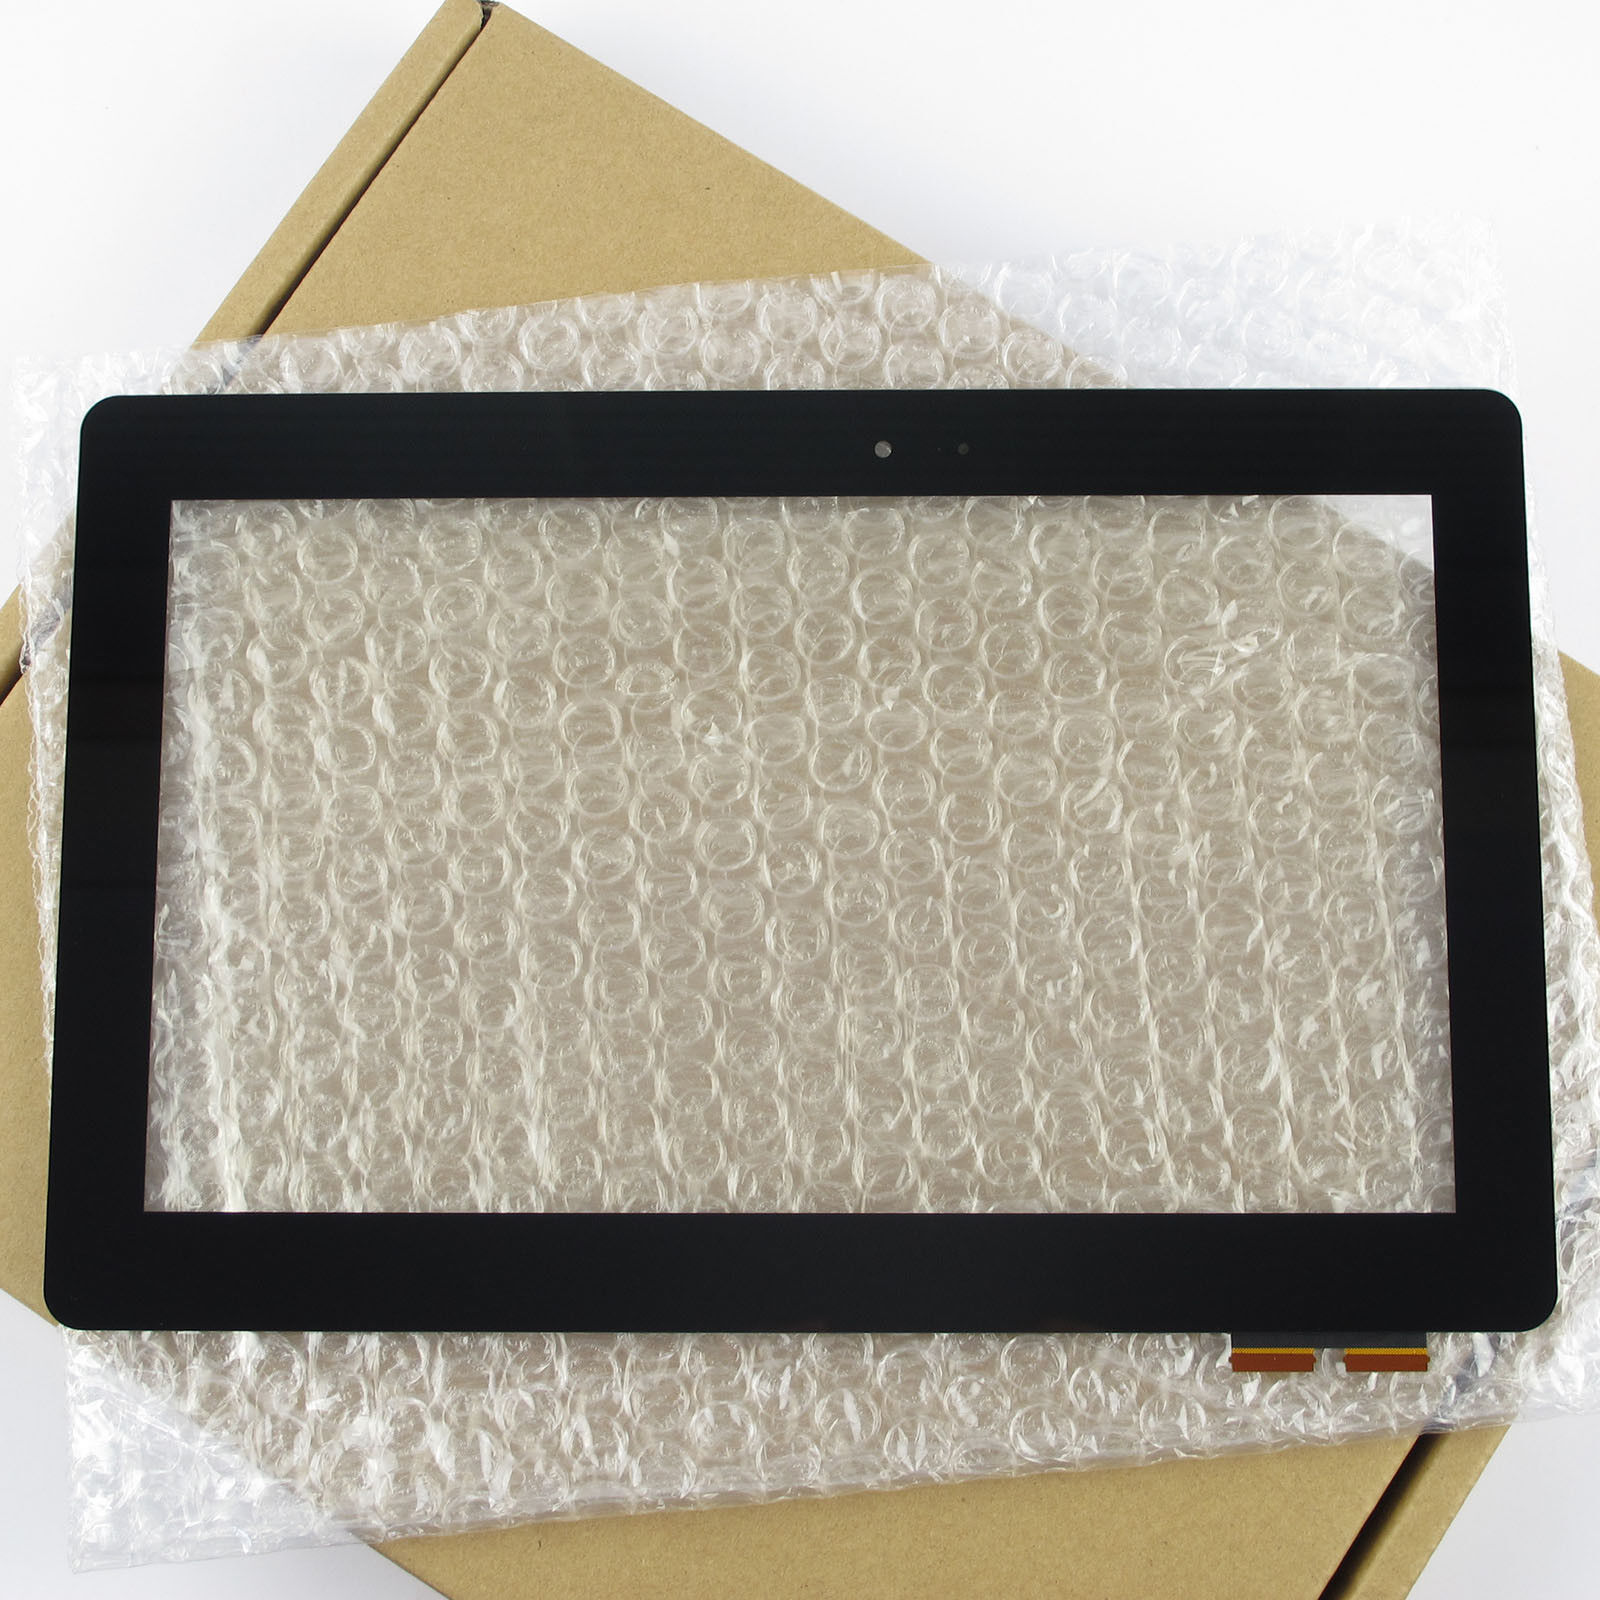 Touch Screen Digitizer Glass Replacement For Asus Transformer Book T100 T100TA Unbranded/Generic Does Not Apply